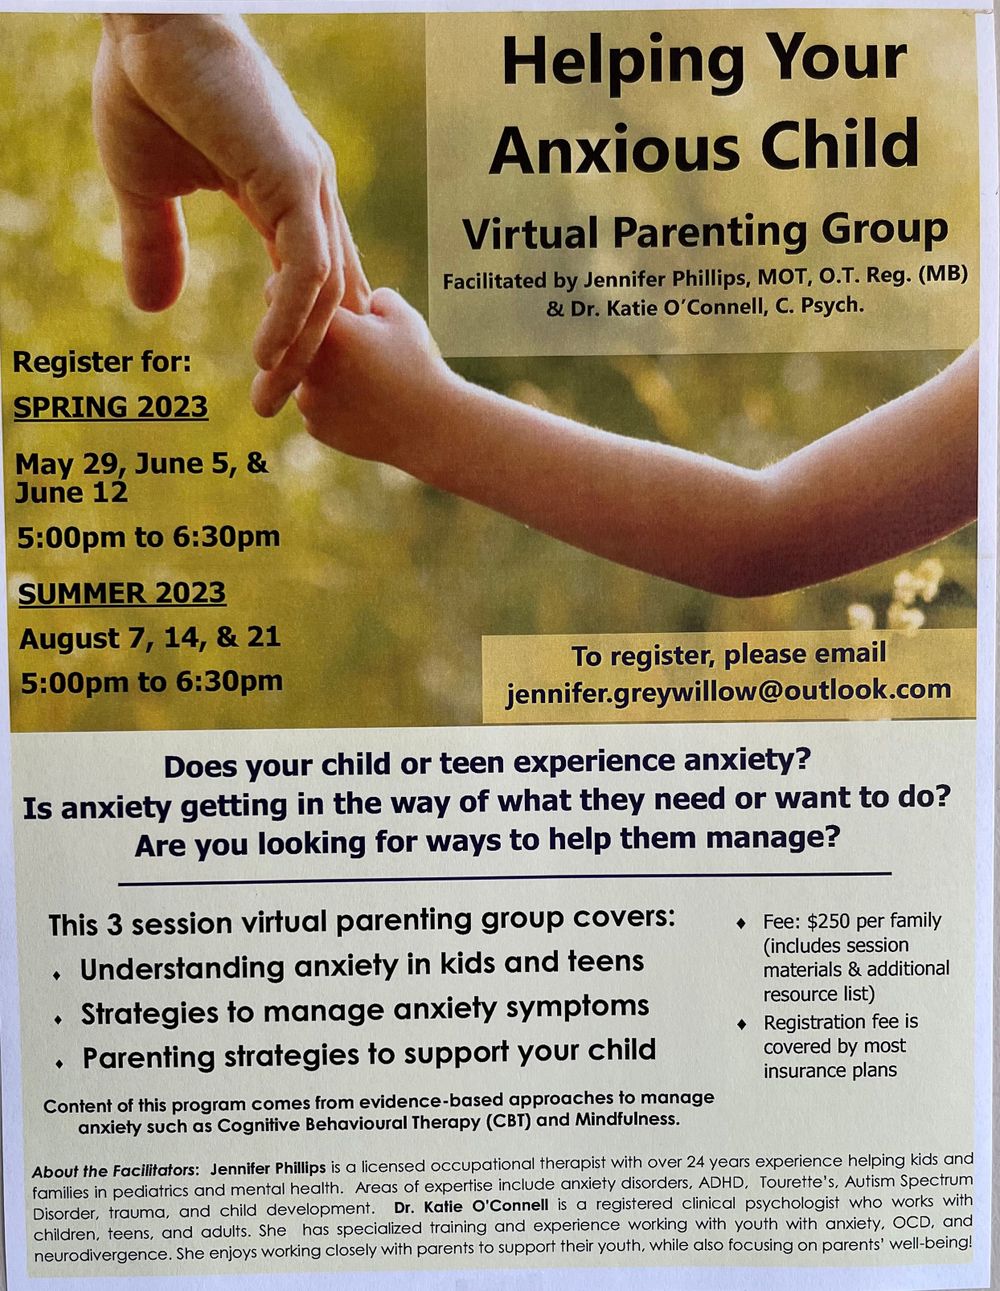 3 session virtual parent group: Understanding anxiety in kids and teens, Strategies to manage anxiety symptoms, Parenting strategies